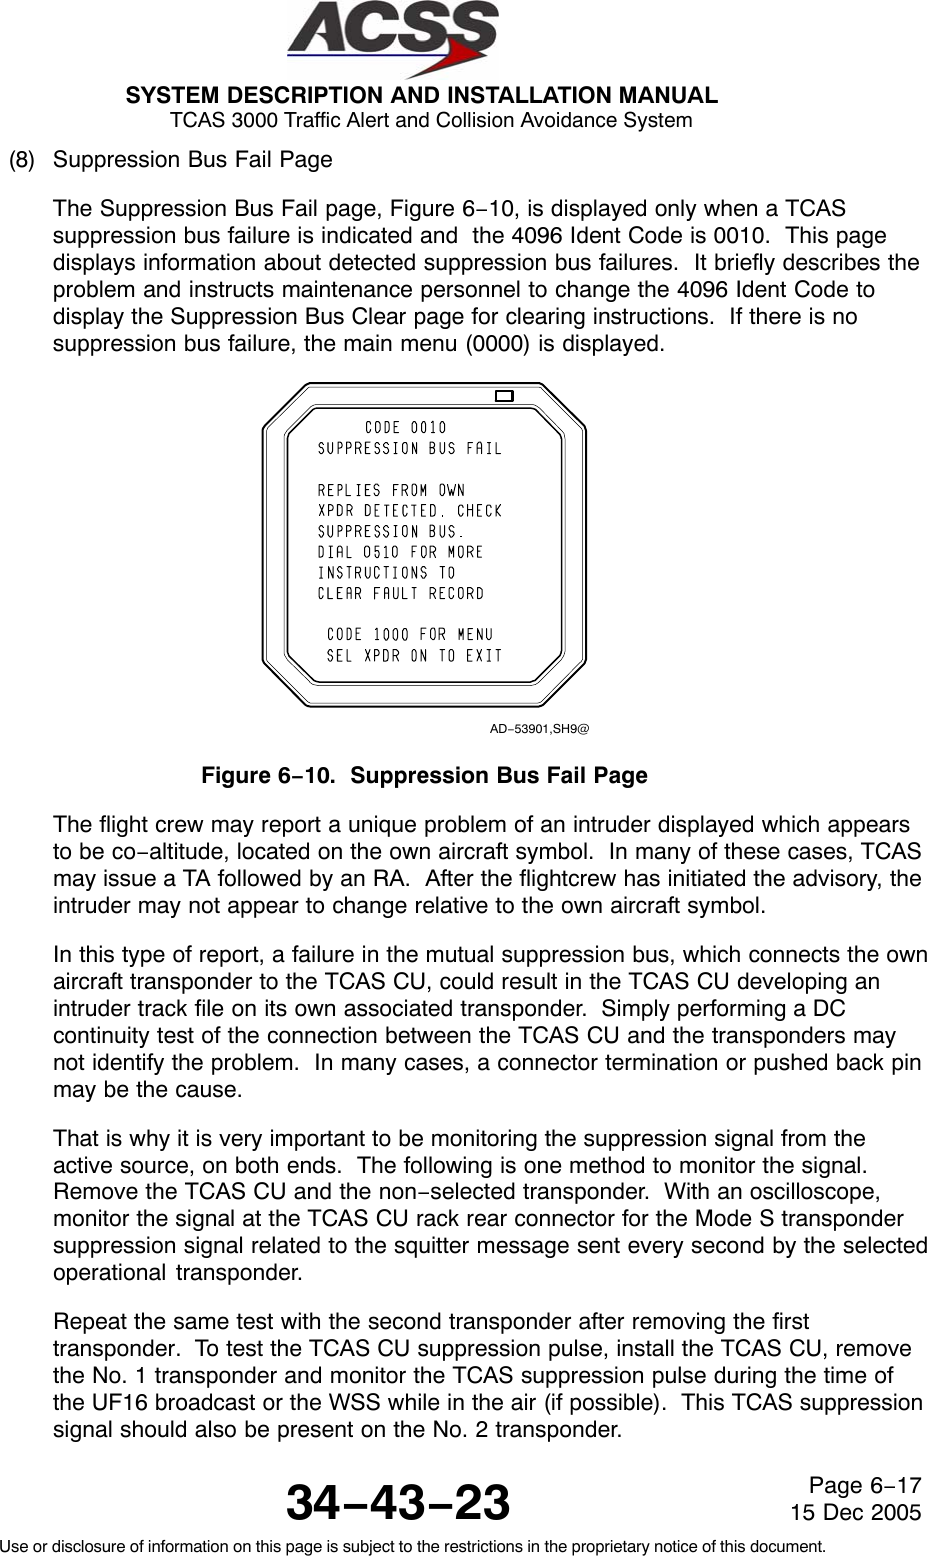 SYSTEM DESCRIPTION AND INSTALLATION MANUAL TCAS 3000 Traffic Alert and Collision Avoidance System34−43−23Use or disclosure of information on this page is subject to the restrictions in the proprietary notice of this document.Page 6−1715 Dec 2005(8) Suppression Bus Fail PageThe Suppression Bus Fail page, Figure 6−10, is displayed only when a TCASsuppression bus failure is indicated and  the 4096 Ident Code is 0010.  This pagedisplays information about detected suppression bus failures.  It briefly describes theproblem and instructs maintenance personnel to change the 4096 Ident Code todisplay the Suppression Bus Clear page for clearing instructions.  If there is nosuppression bus failure, the main menu (0000) is displayed.AD−53901,SH9@Figure 6−10.  Suppression Bus Fail PageThe flight crew may report a unique problem of an intruder displayed which appearsto be co−altitude, located on the own aircraft symbol.  In many of these cases, TCASmay issue a TA followed by an RA.  After the flightcrew has initiated the advisory, theintruder may not appear to change relative to the own aircraft symbol.In this type of report, a failure in the mutual suppression bus, which connects the ownaircraft transponder to the TCAS CU, could result in the TCAS CU developing anintruder track file on its own associated transponder.  Simply performing a DCcontinuity test of the connection between the TCAS CU and the transponders maynot identify the problem.  In many cases, a connector termination or pushed back pinmay be the cause.That is why it is very important to be monitoring the suppression signal from theactive source, on both ends.  The following is one method to monitor the signal.Remove the TCAS CU and the non−selected transponder.  With an oscilloscope,monitor the signal at the TCAS CU rack rear connector for the Mode S transpondersuppression signal related to the squitter message sent every second by the selectedoperational transponder.Repeat the same test with the second transponder after removing the firsttransponder.  To test the TCAS CU suppression pulse, install the TCAS CU, removethe No. 1 transponder and monitor the TCAS suppression pulse during the time ofthe UF16 broadcast or the WSS while in the air (if possible).  This TCAS suppressionsignal should also be present on the No. 2 transponder.